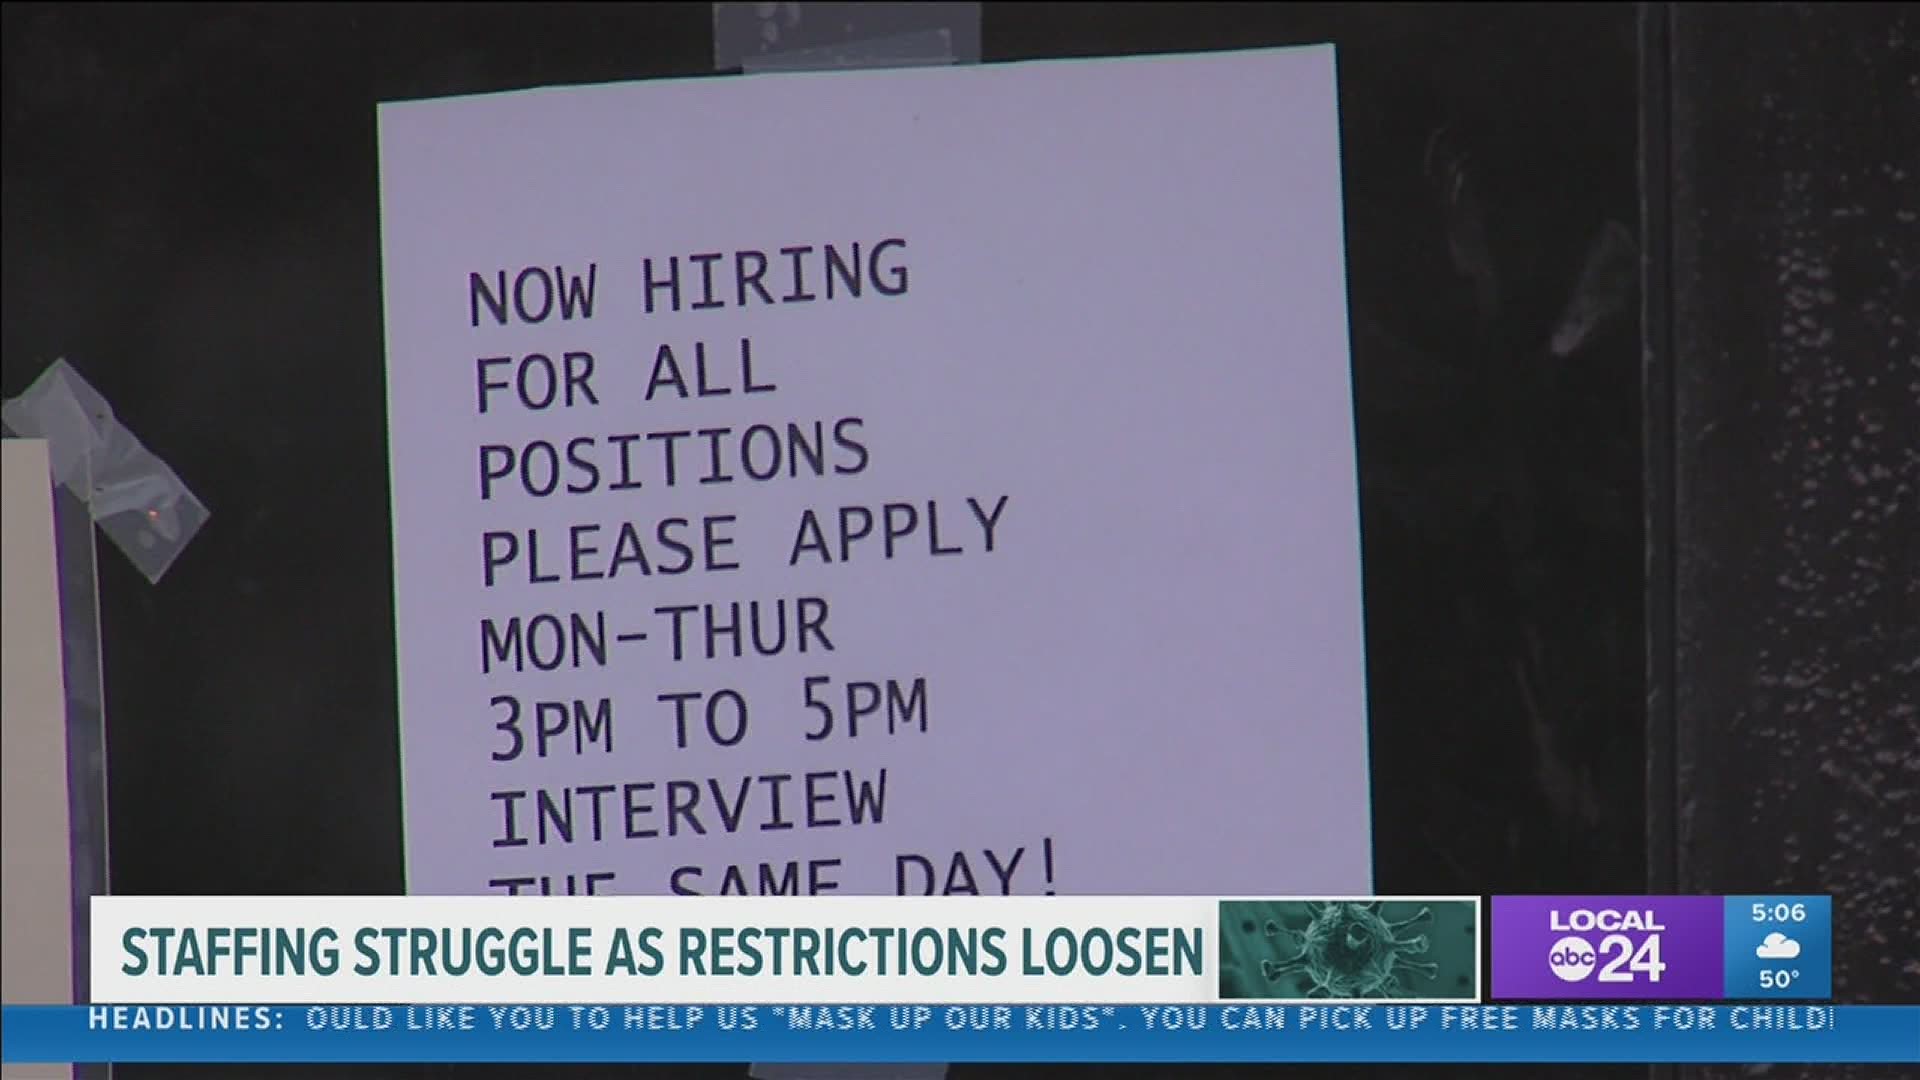 Another new health directive will start Saturday, making it easier for restaurants to operate, but the challenge for many is now focused on hiring.